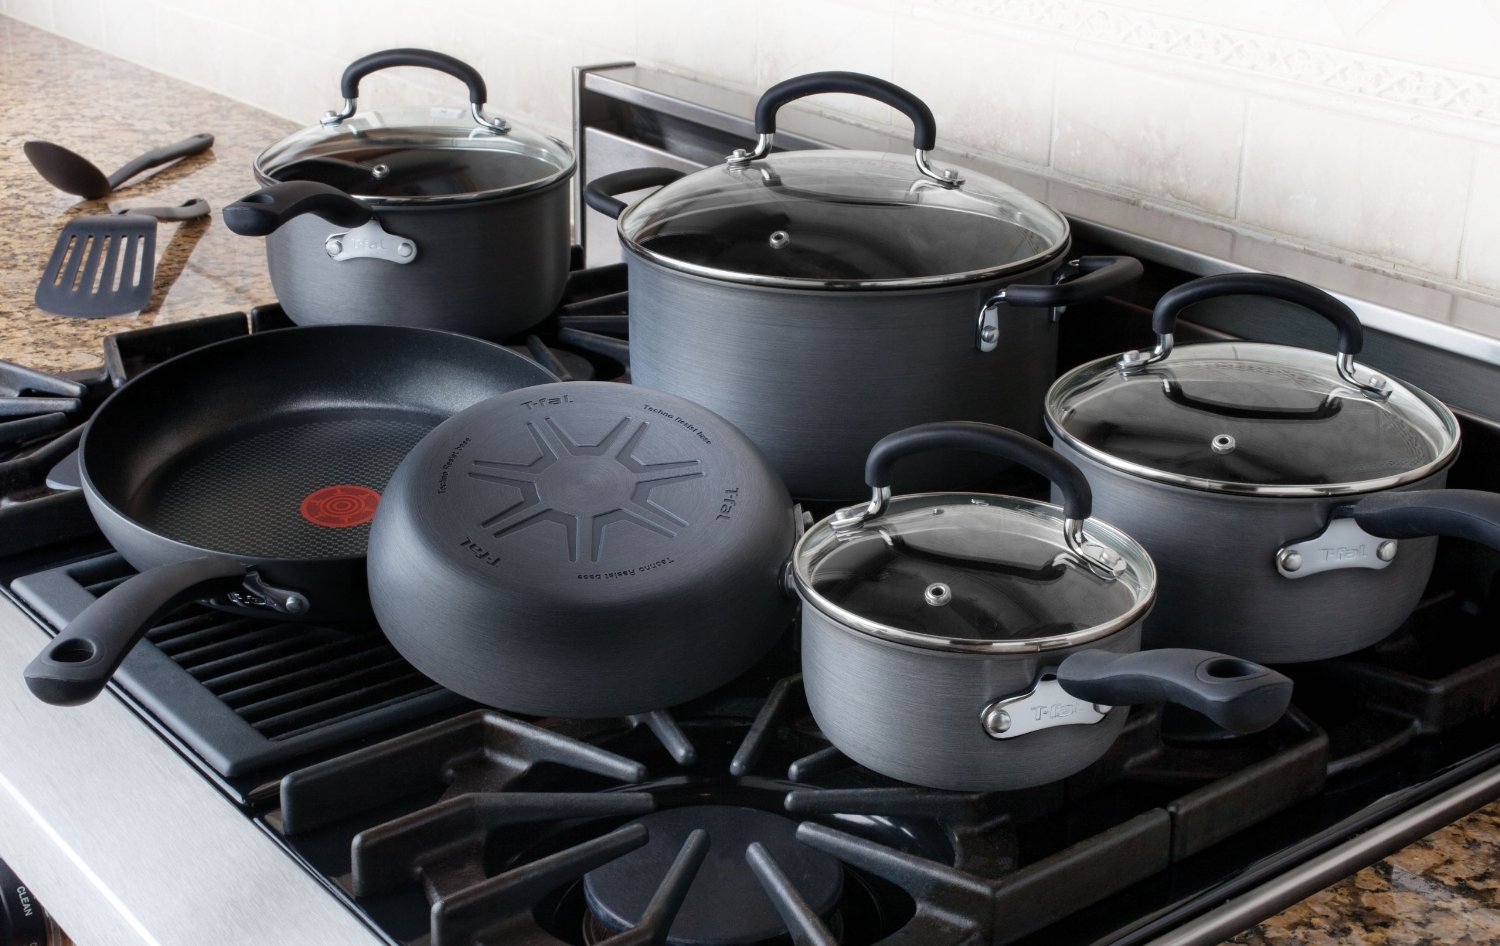 Home: T-fal's best-selling 12-pc. cookware set $80 (Orig. $150), 2-pack  stick-on touch LED lights $12 (Reg. $18), more